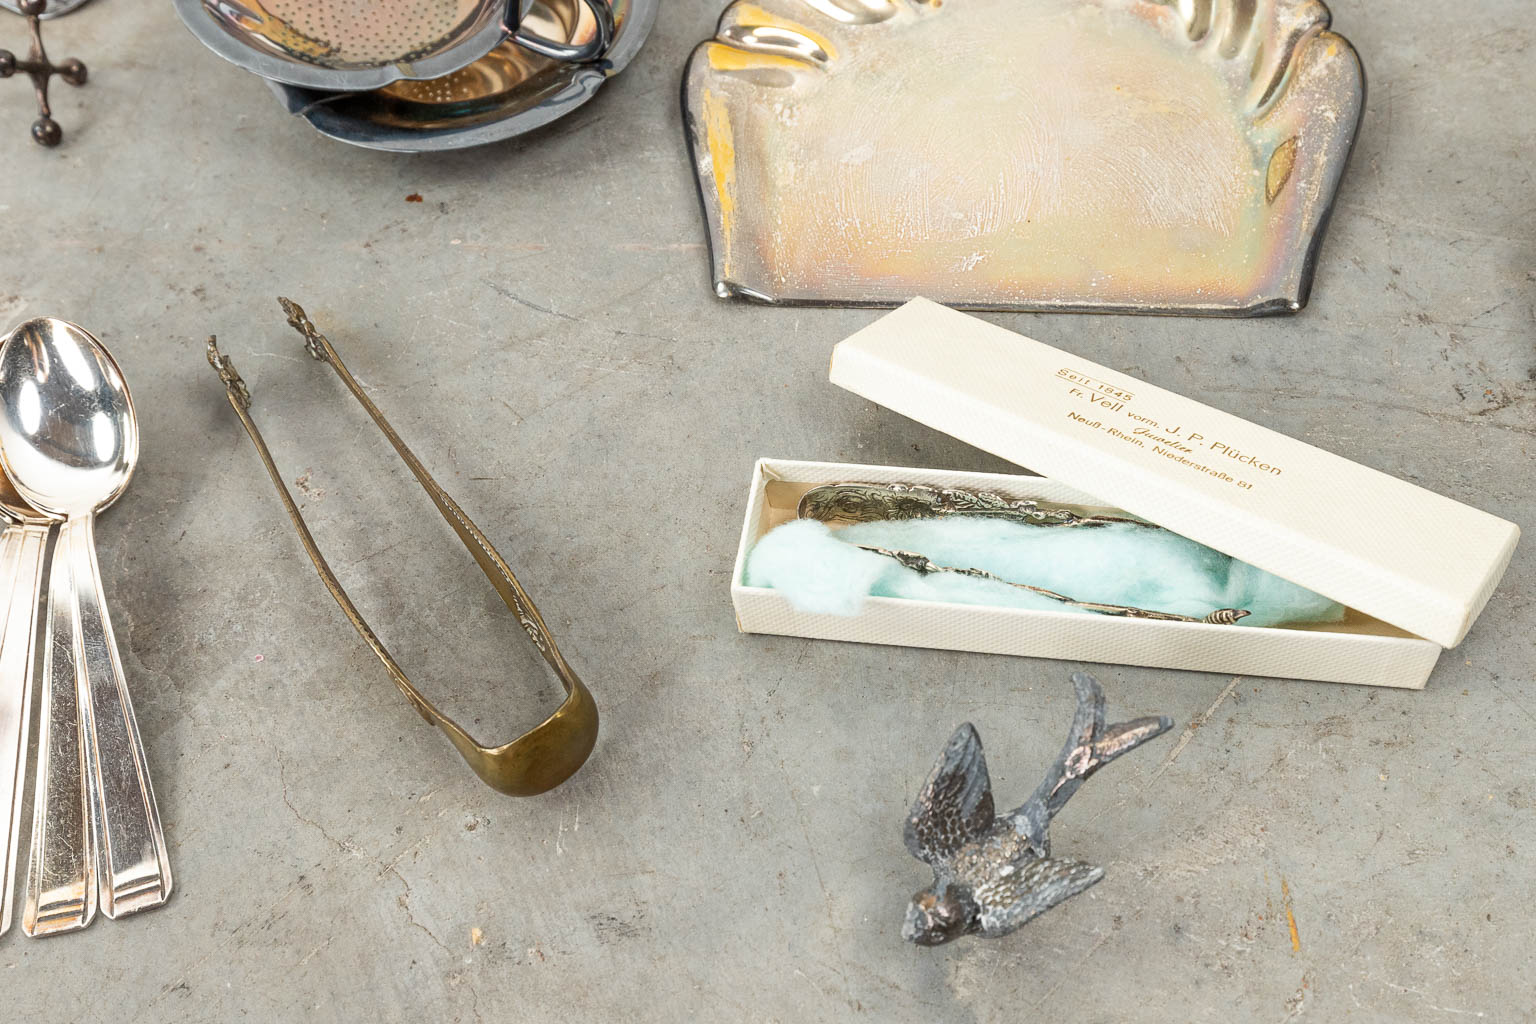 An assembled collection of silver-plated cutlery and accessories. 